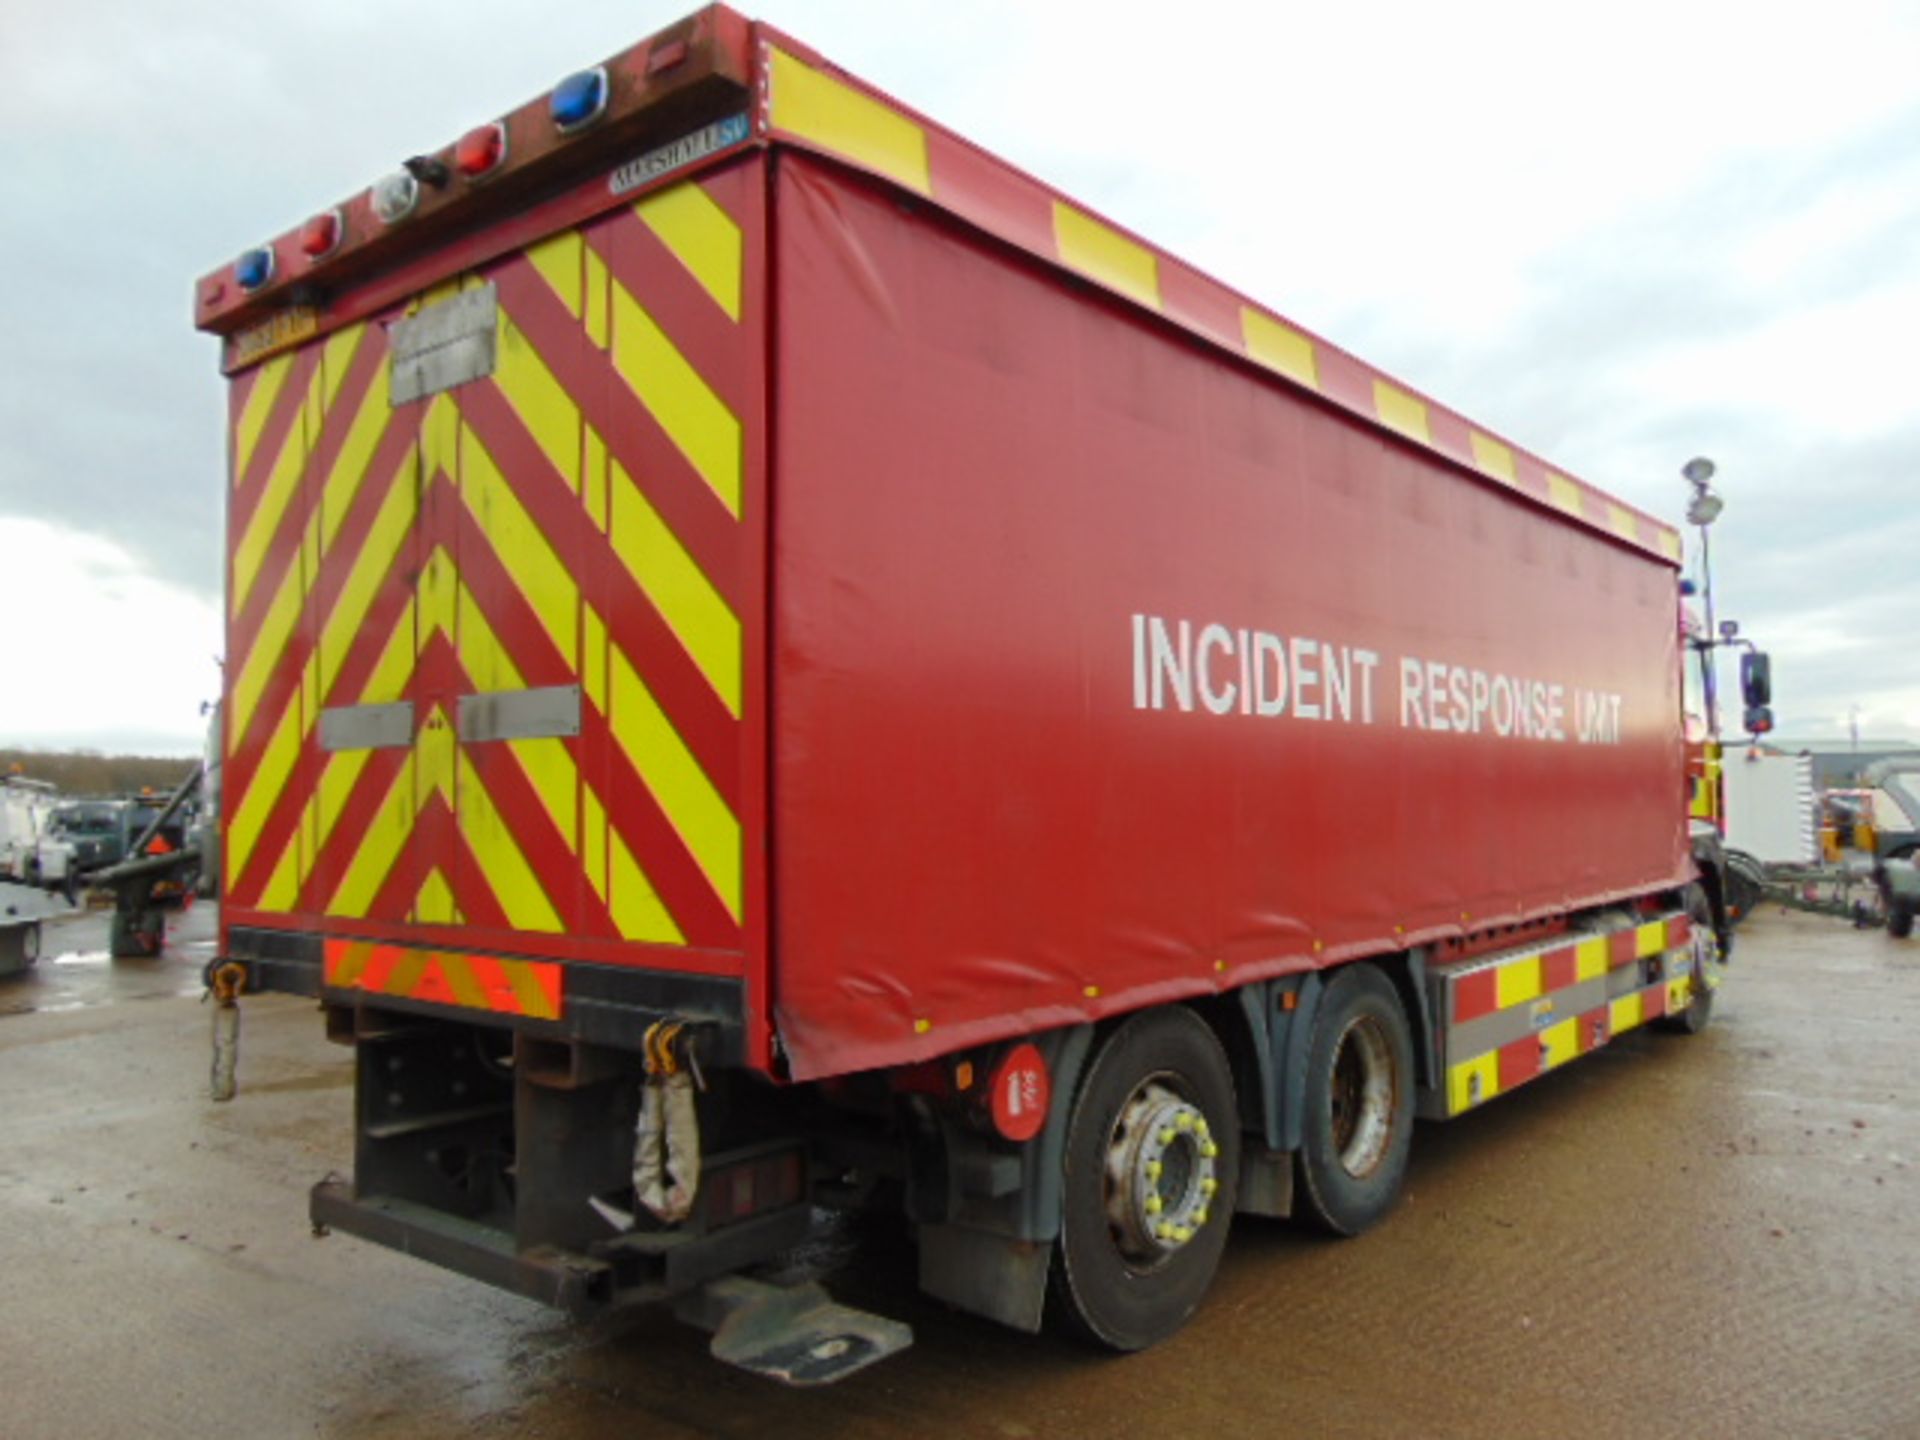 2004 MAN TG-A 6x2 Incident Support Unit - Image 6 of 26